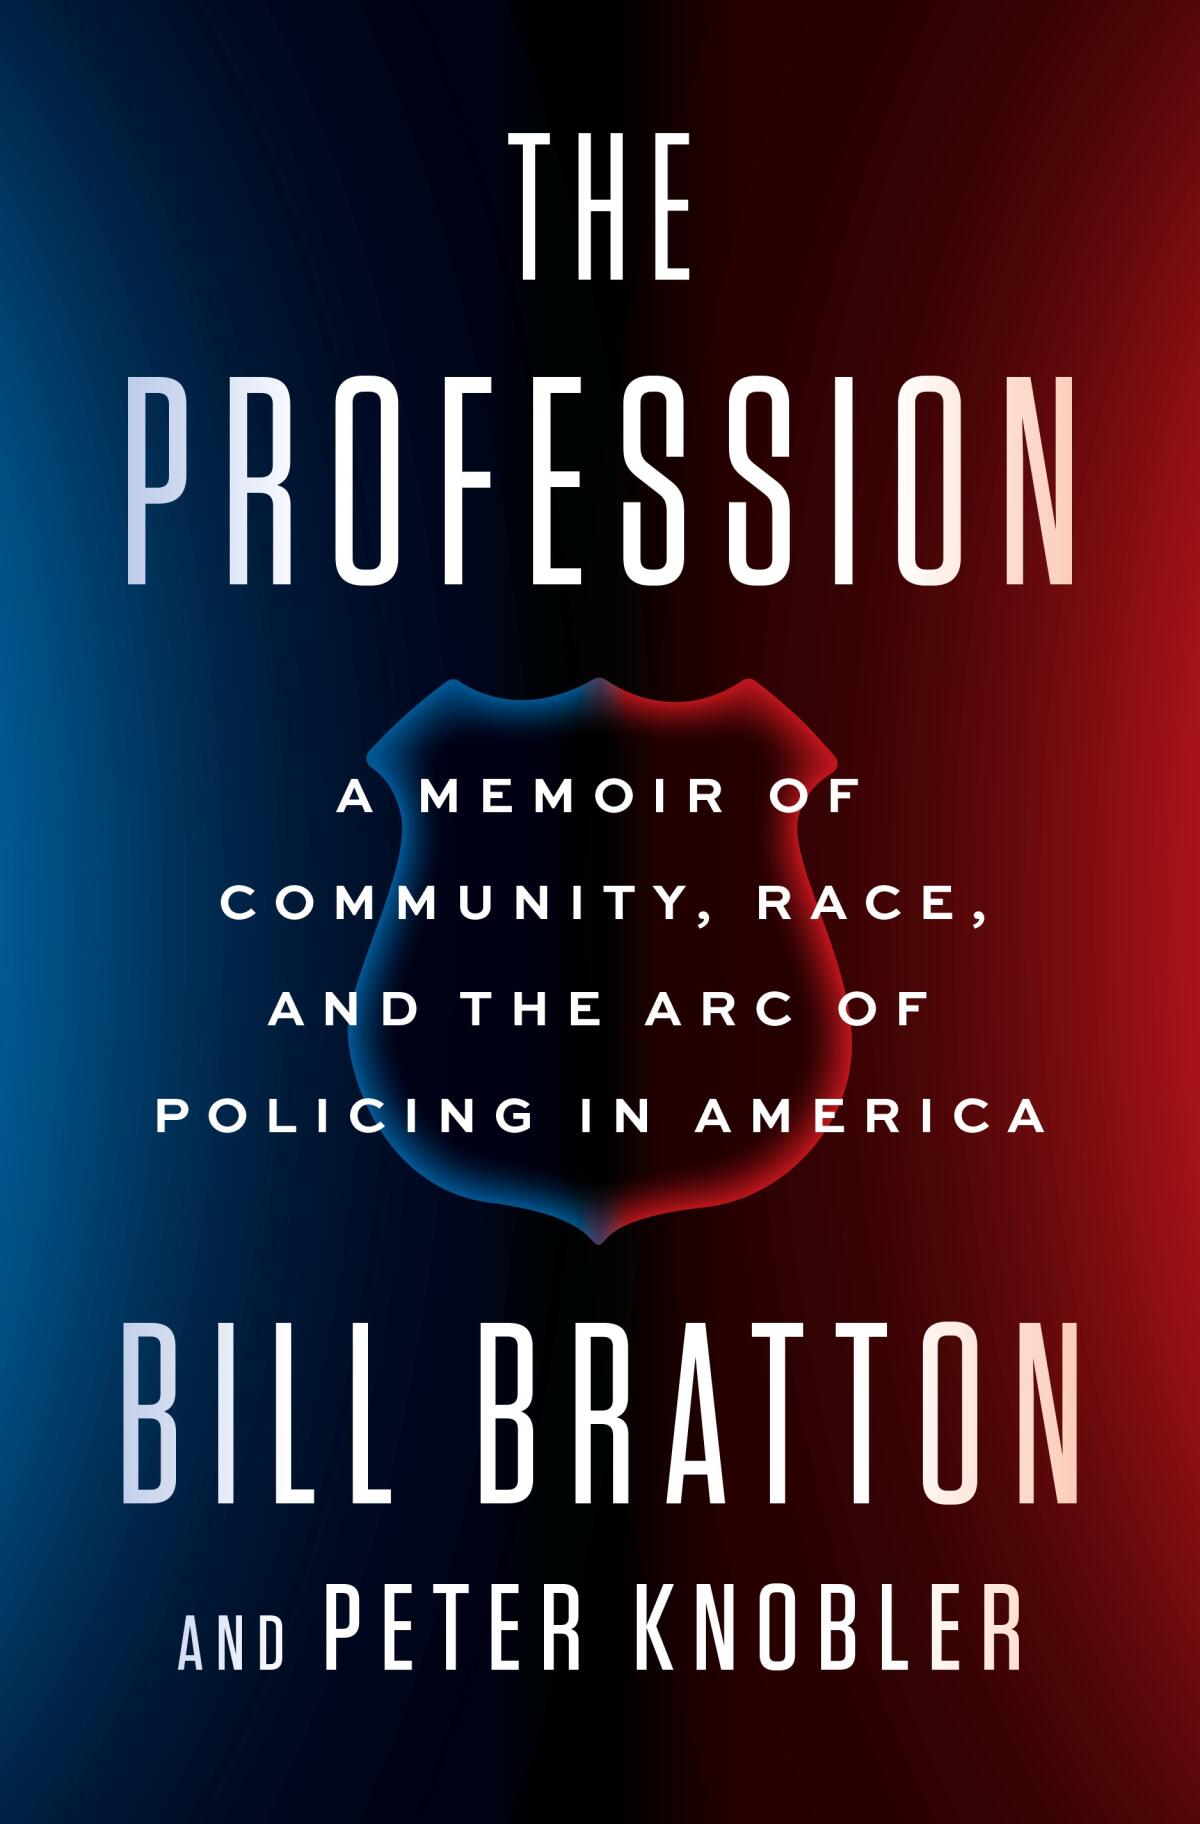 A book jacket for "The Profession," by Bill Bratton and Peter Knobler. Credit: Penguin Random House